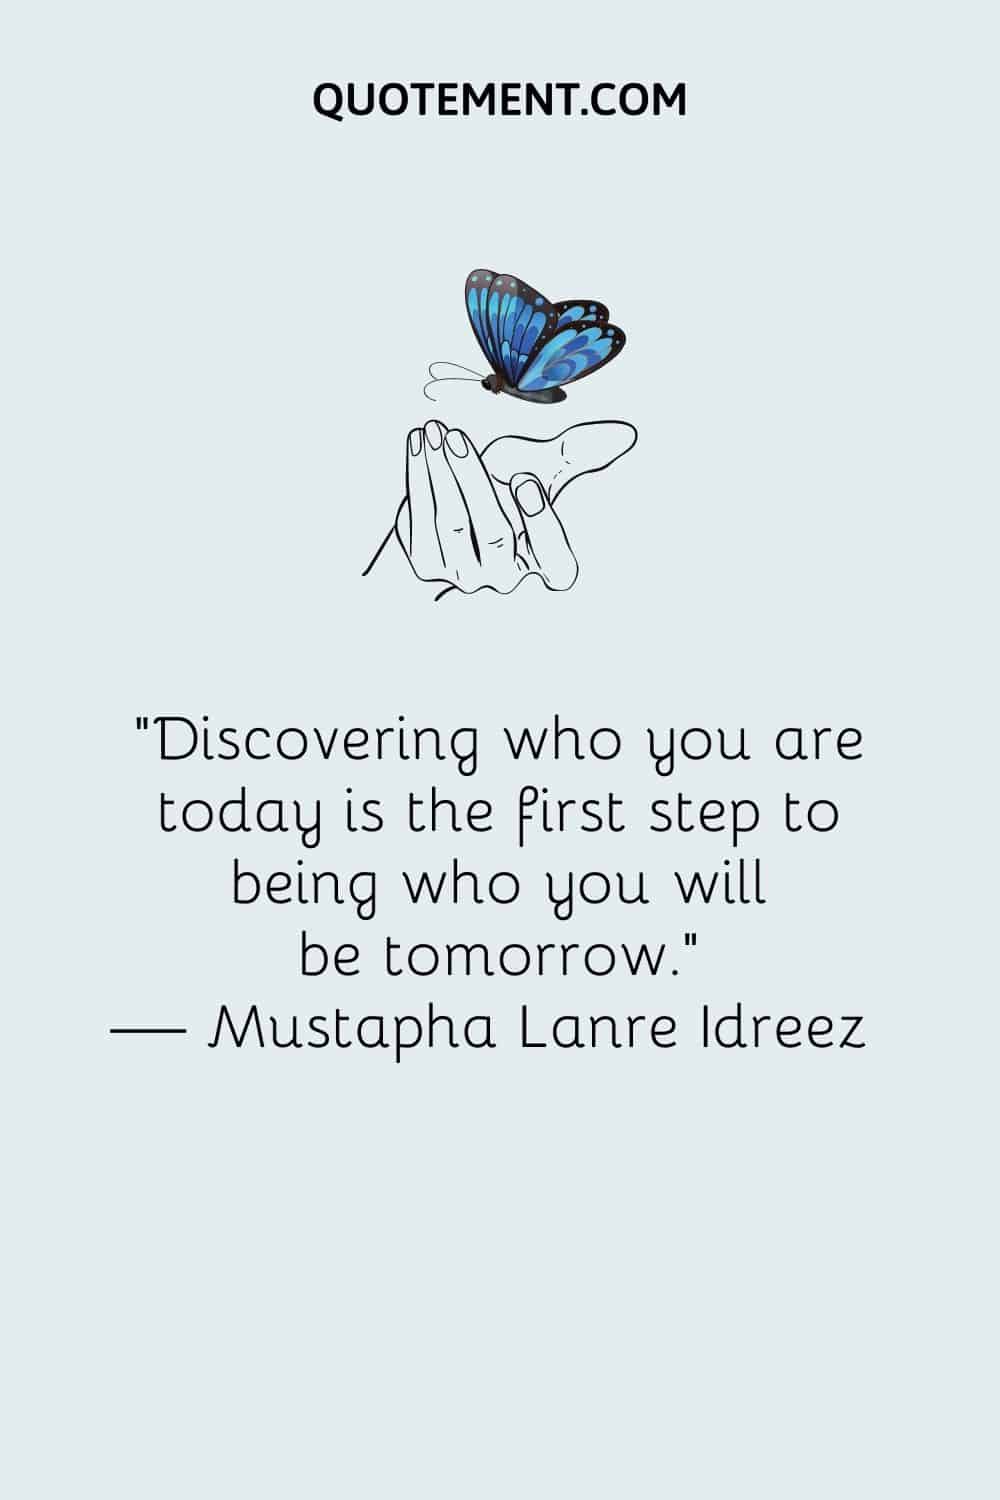 Discovering who you are today is the first step to being who you will be tomorrow